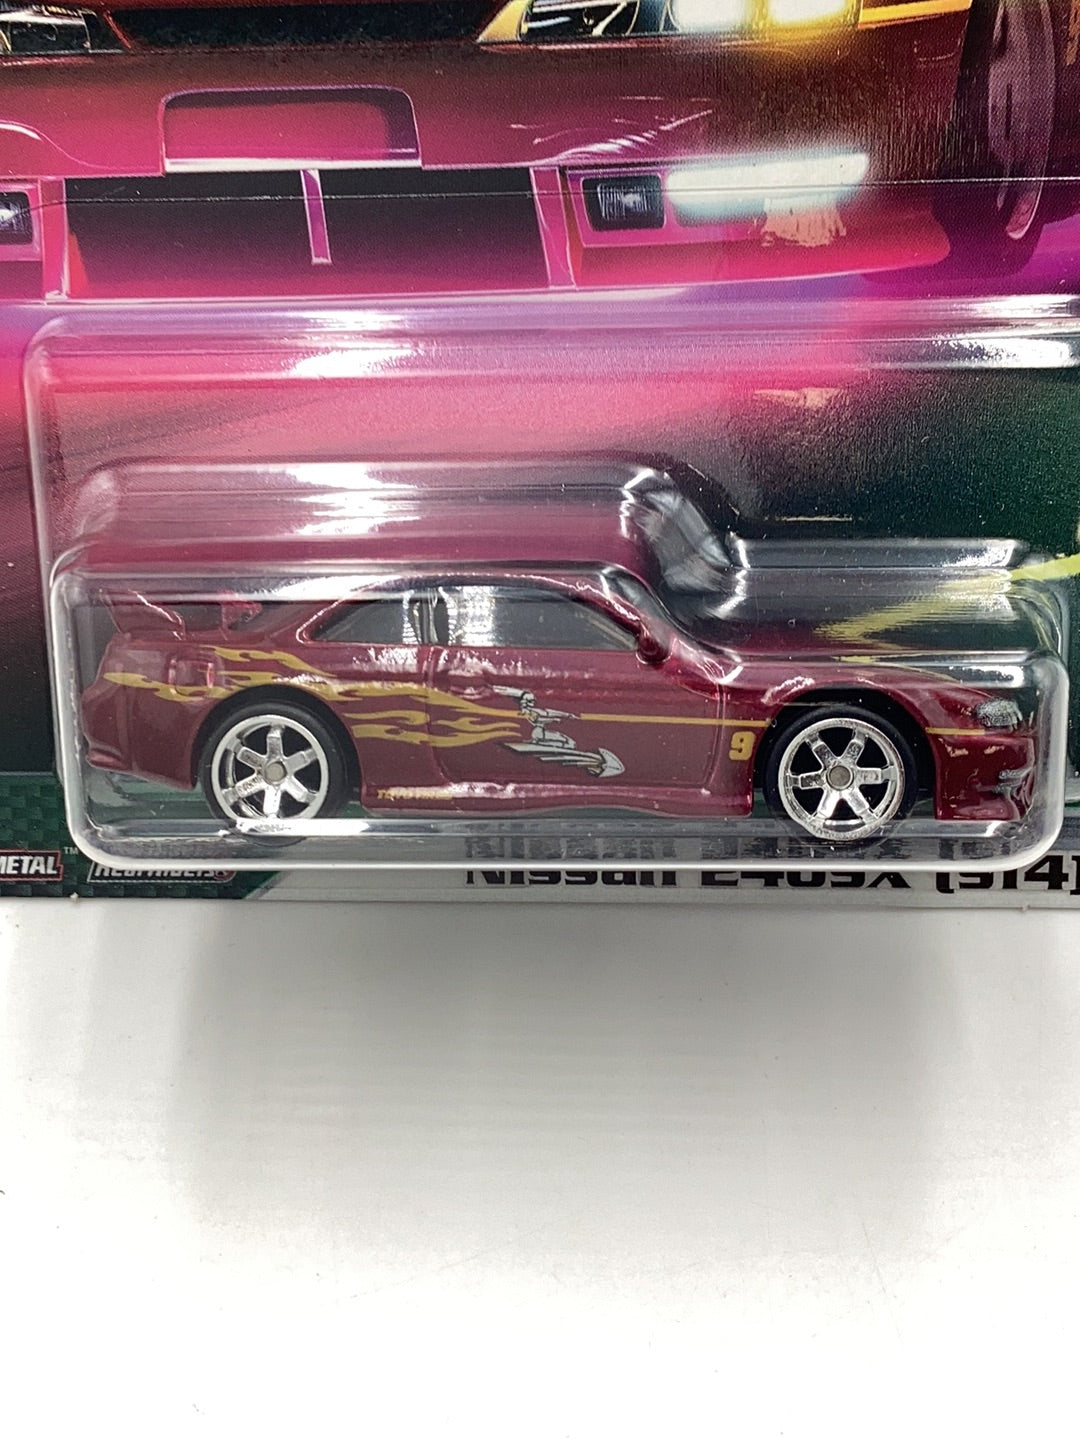 Hot wheels premium fast and furious Original Fast 1/5 Nissan 240SX (S14) with protector